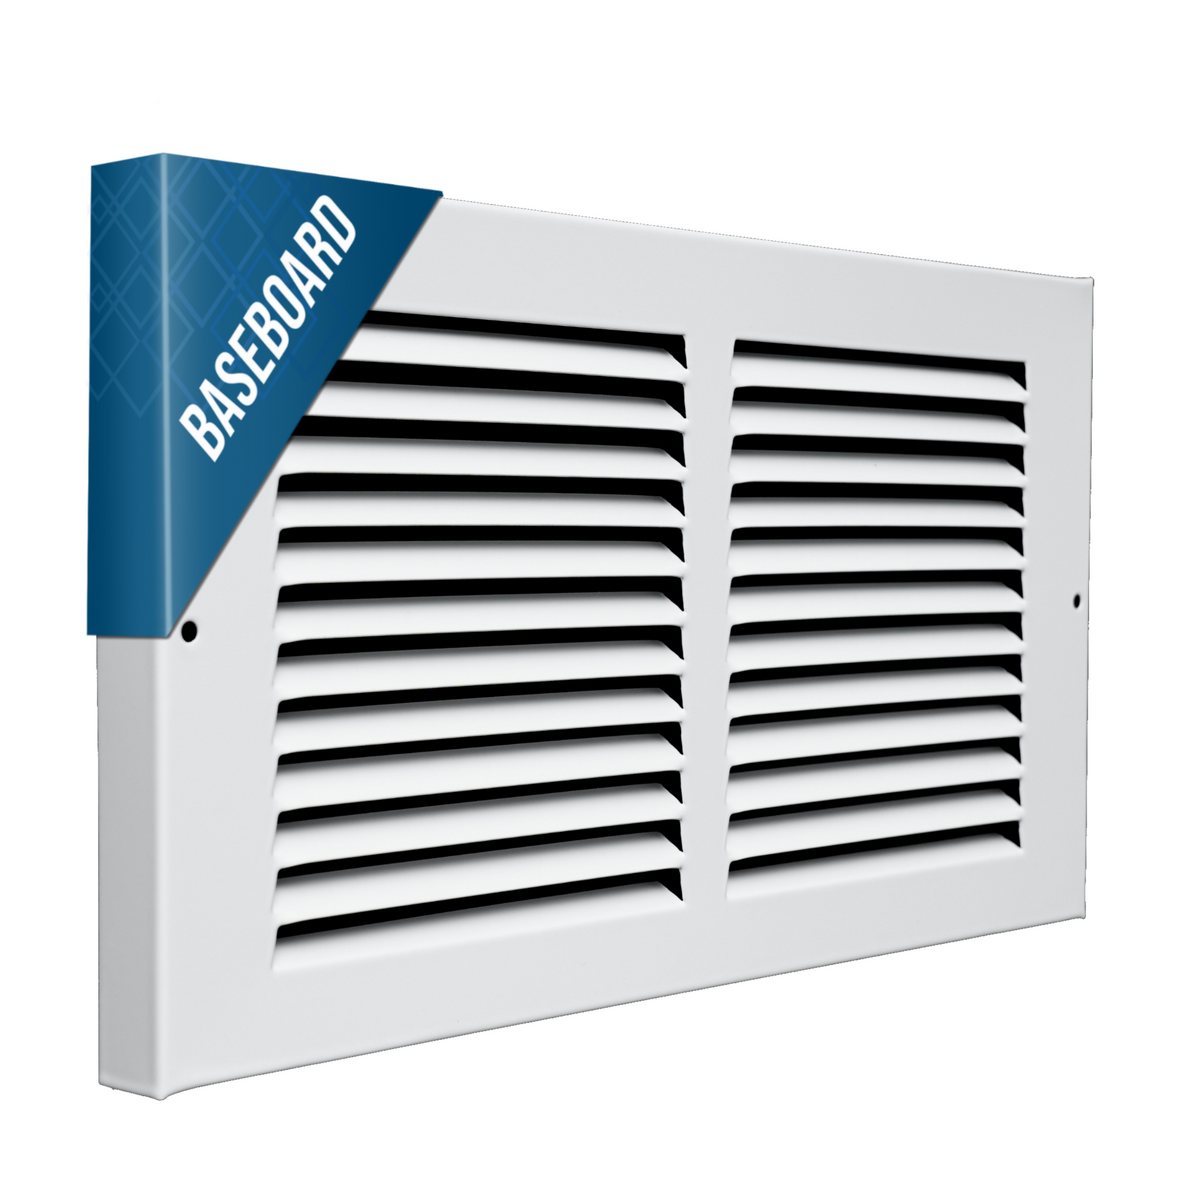 14"W x 6"H [Duct Opening] Baseboard Return Air Grille | 7/8" Margin Turnback to Fit Baseboard | White | Outer Dimensions: 15.75"W X 7.75"H